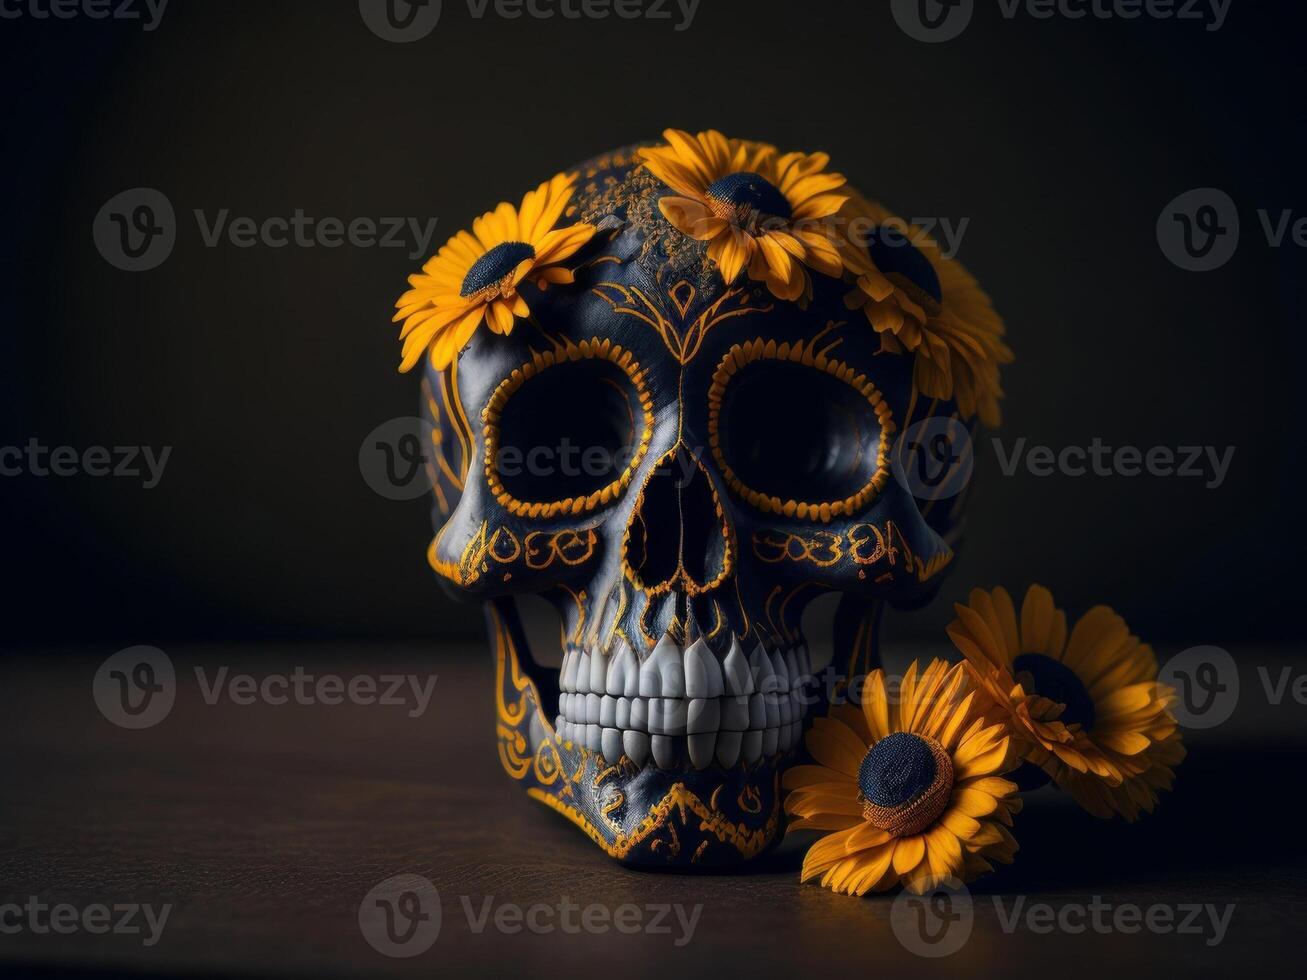 Sugar skull with flowers on black background. photo